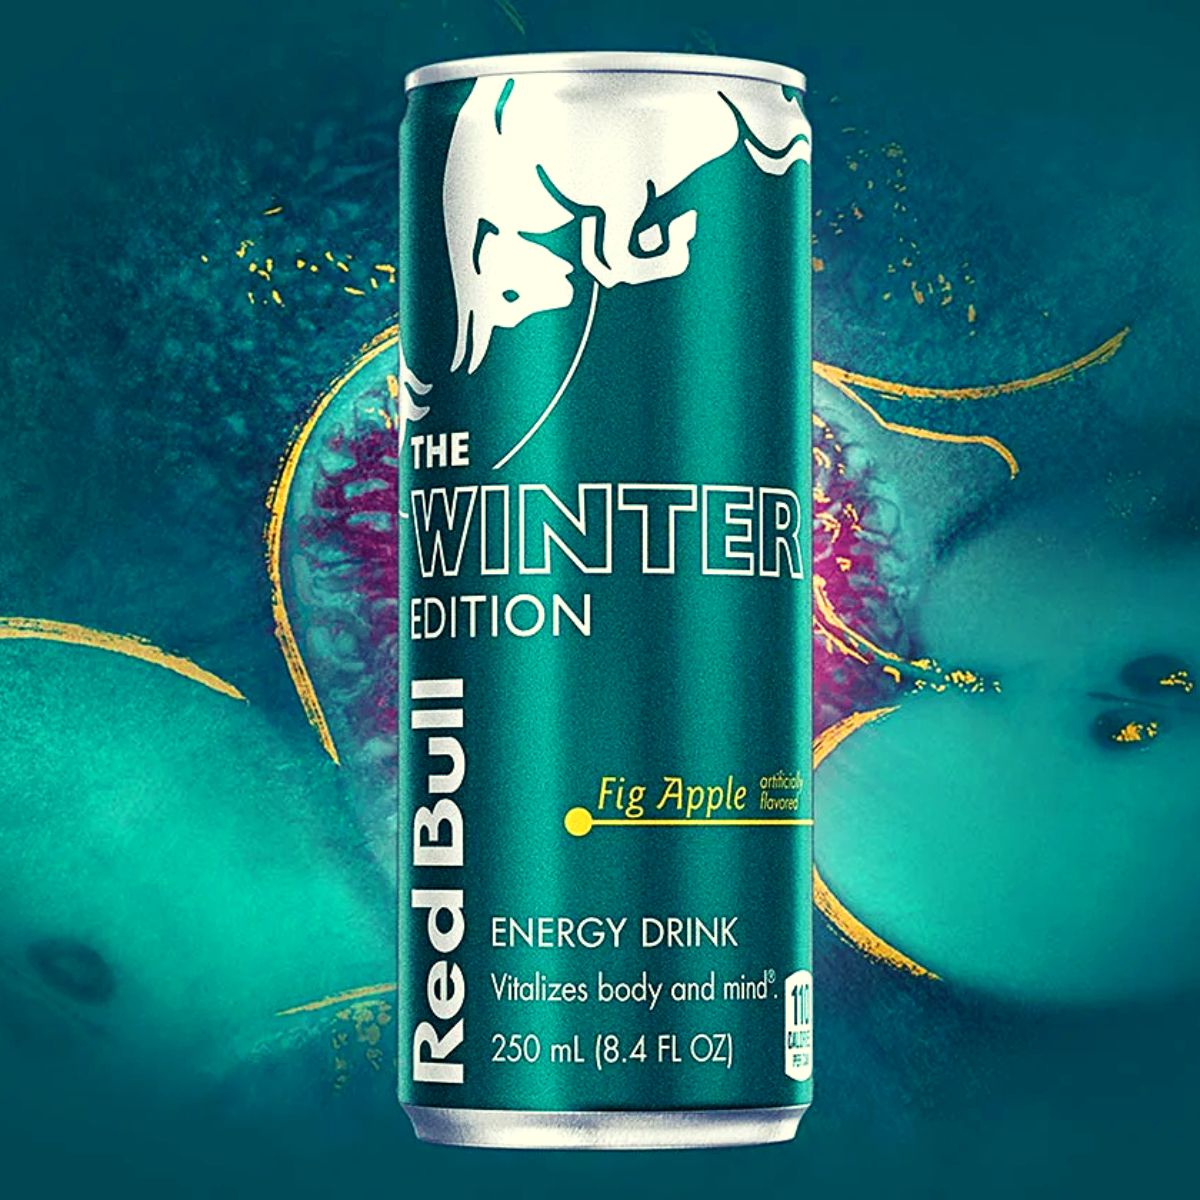 New Red Bull Winter Edition Flavor Will Be Fig Apple — Best Price Nutrition